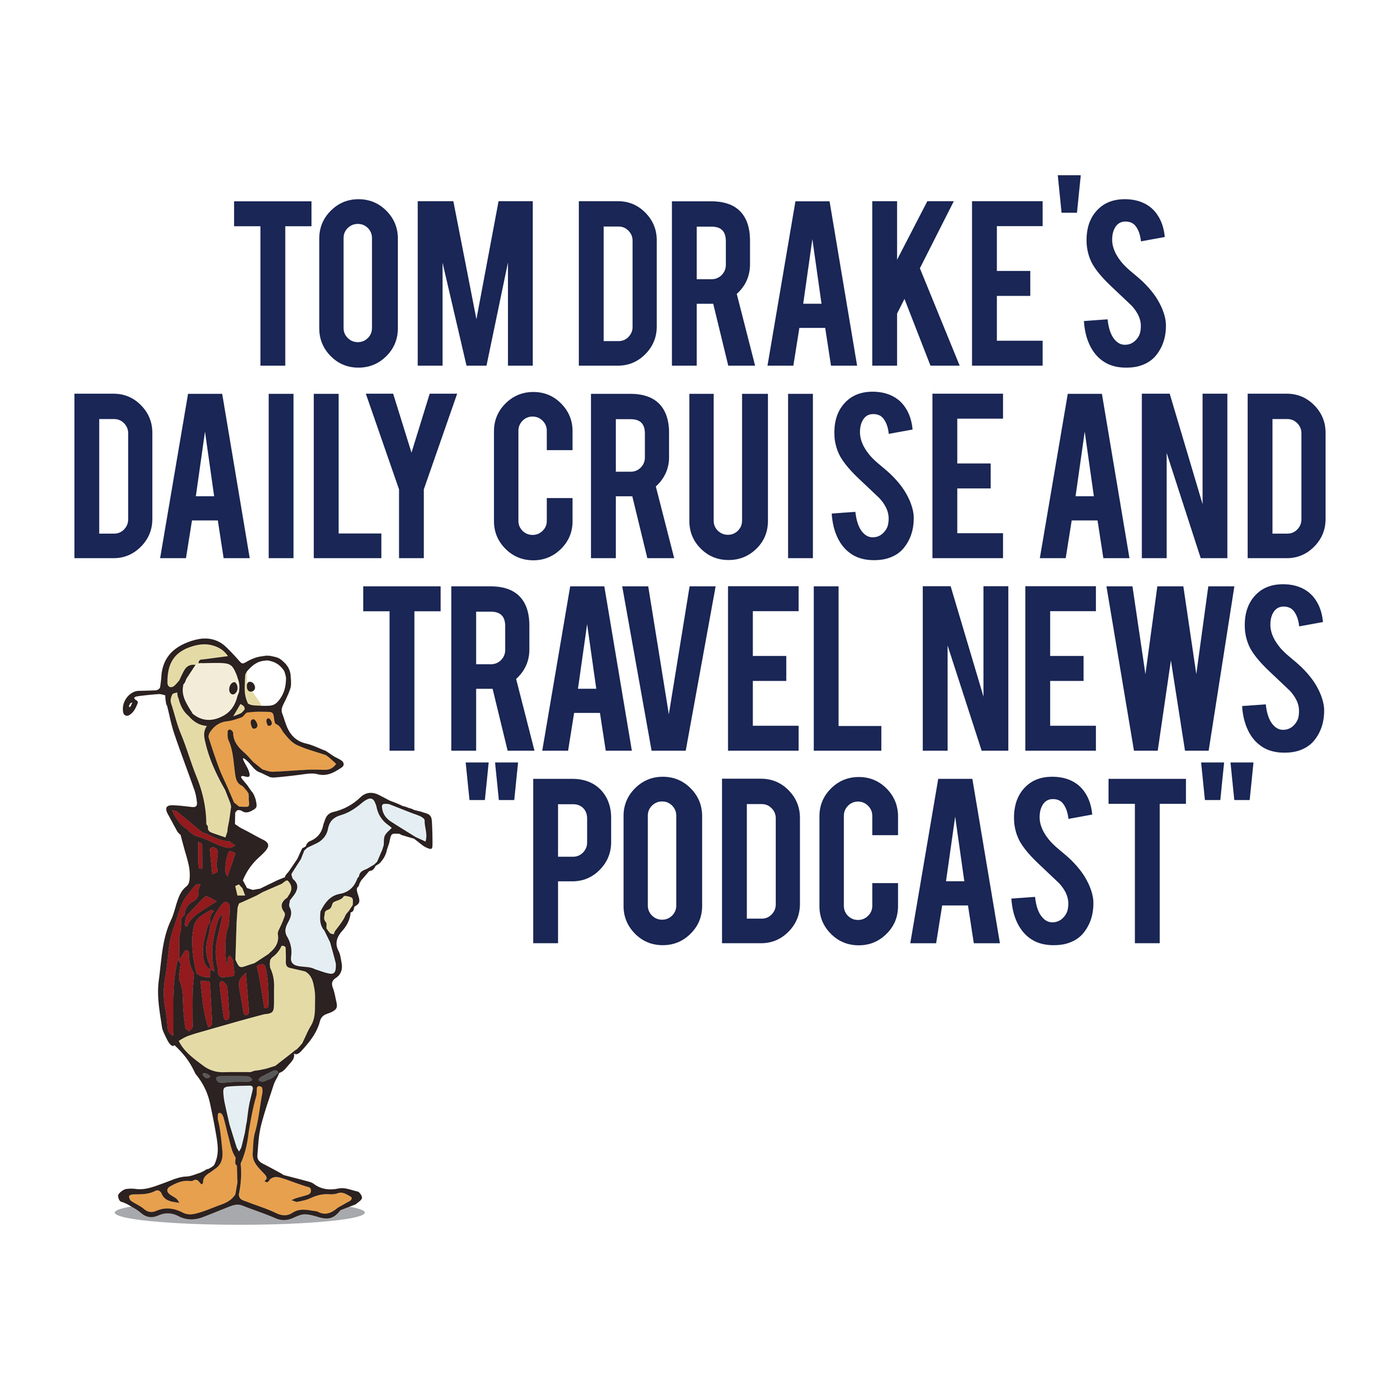 Tom Drake's Daily Cruise and Travel News "Podcast"